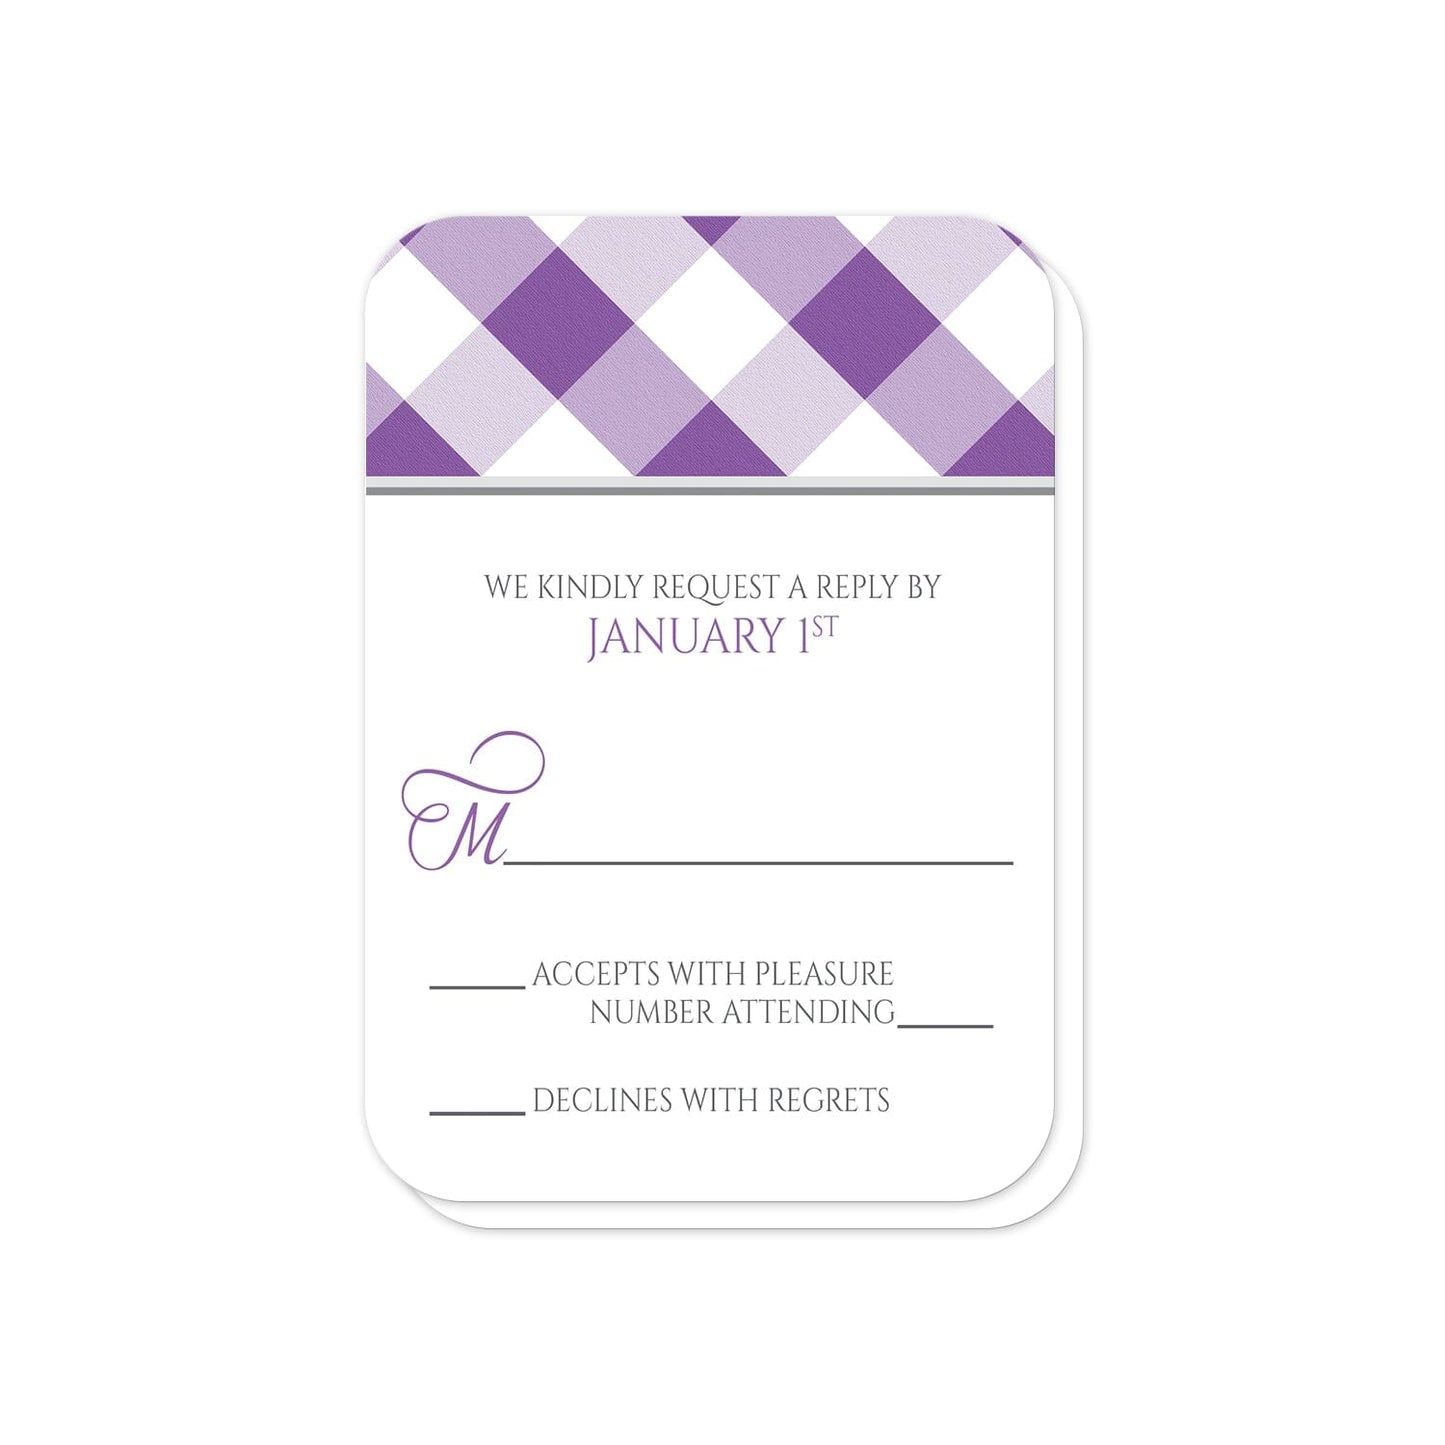 Purple Gingham RSVP Cards (with rounded corners) at Artistically Invited.